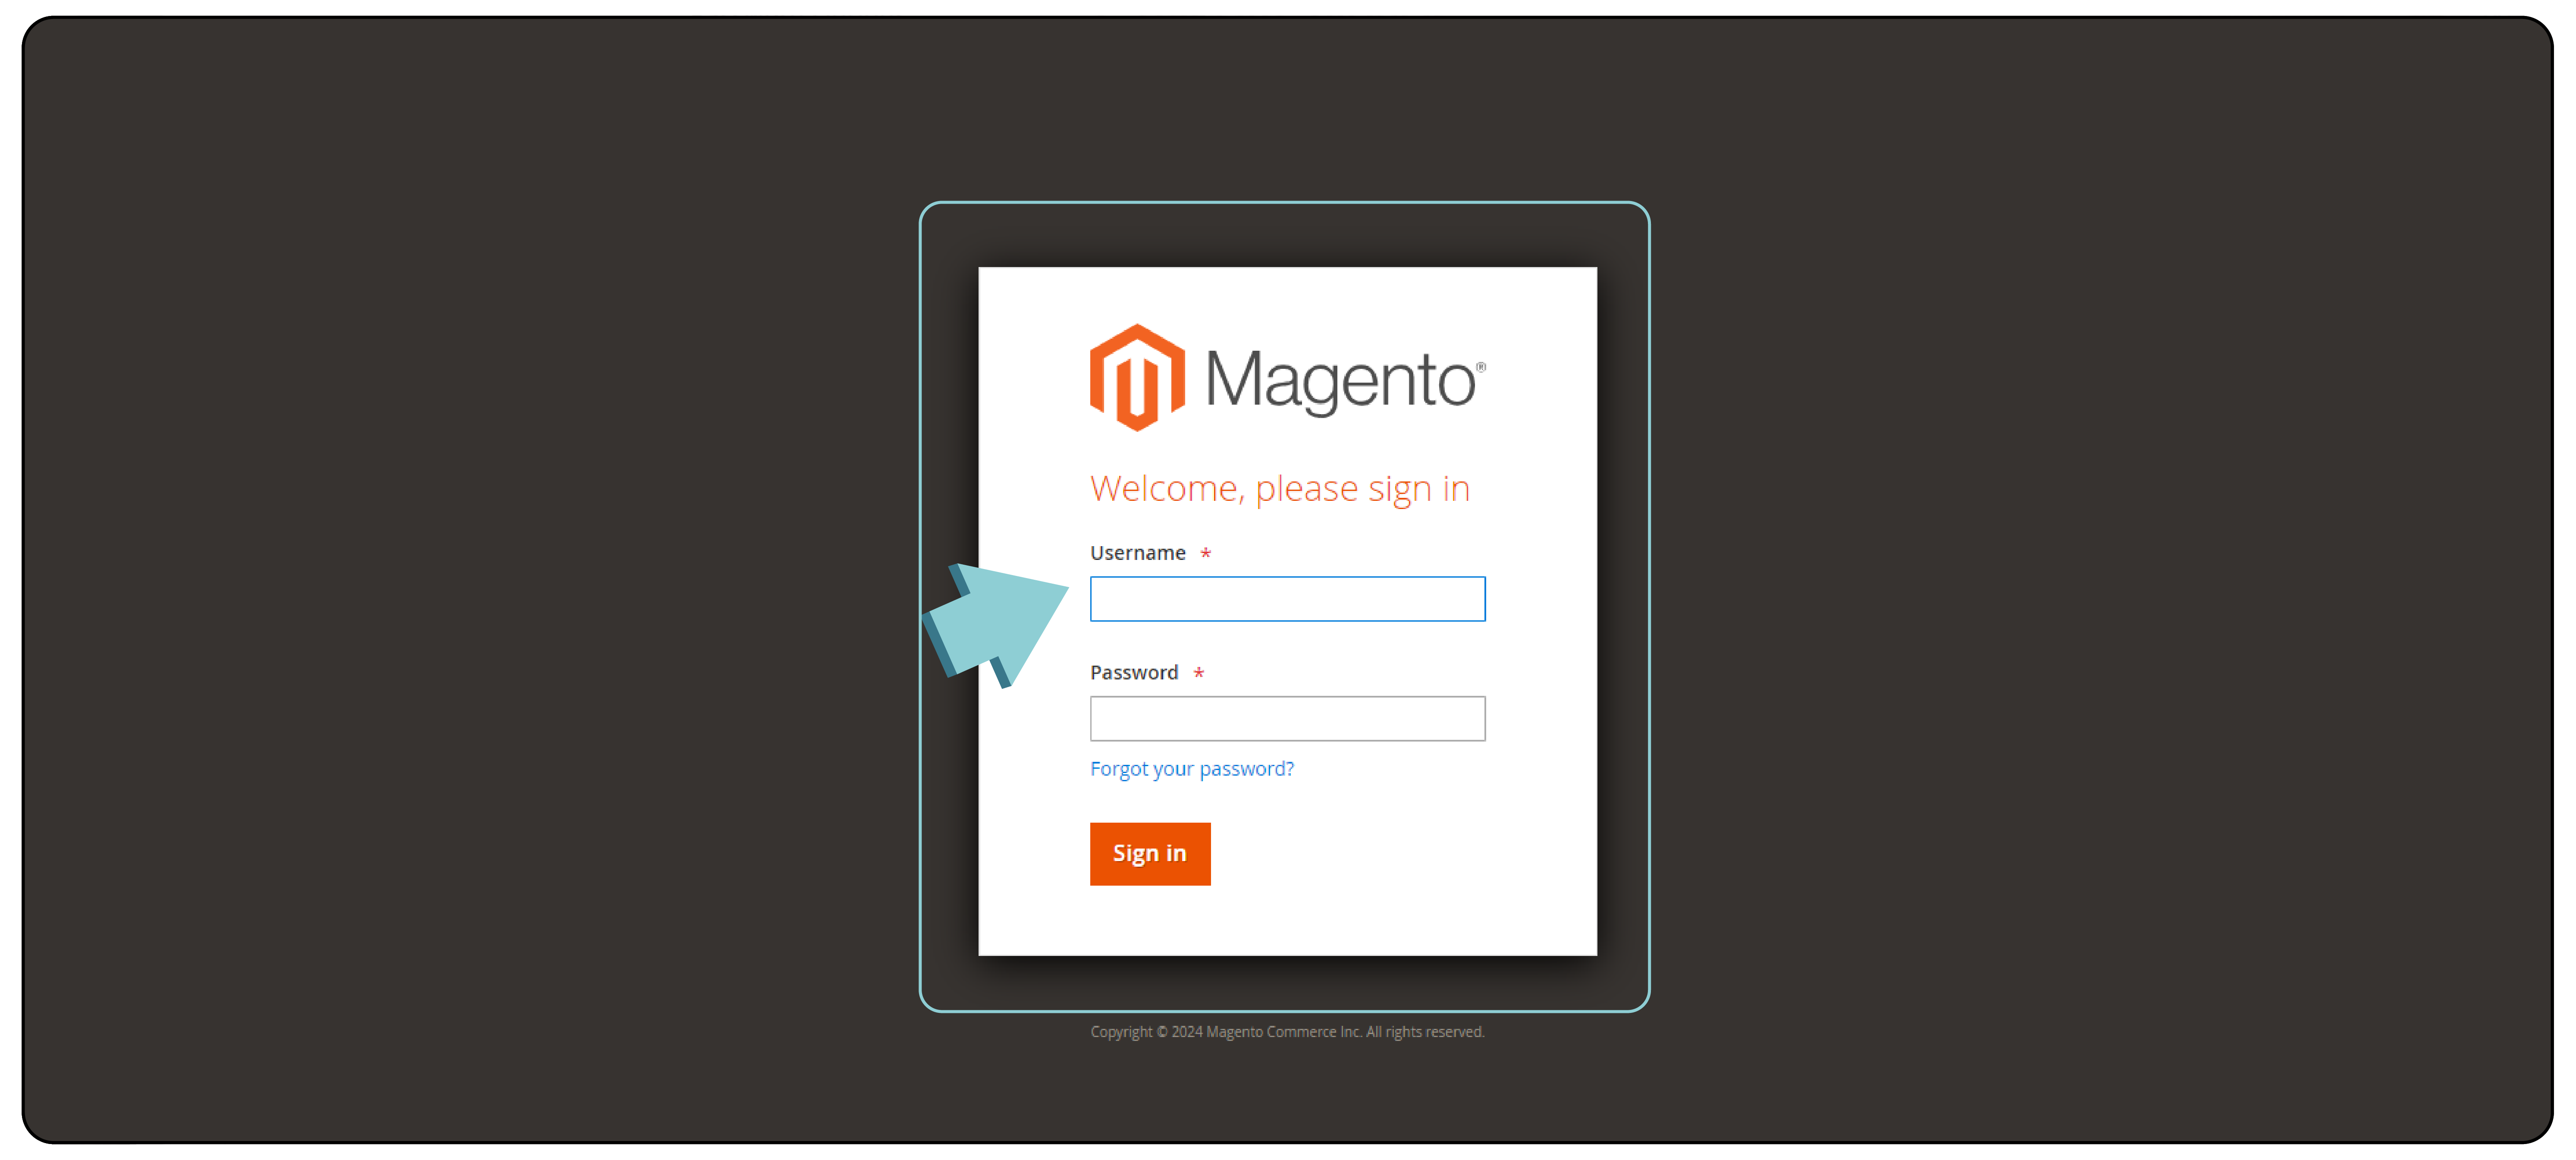 How To Configure Cron Jobs in Magento 2 Step 1